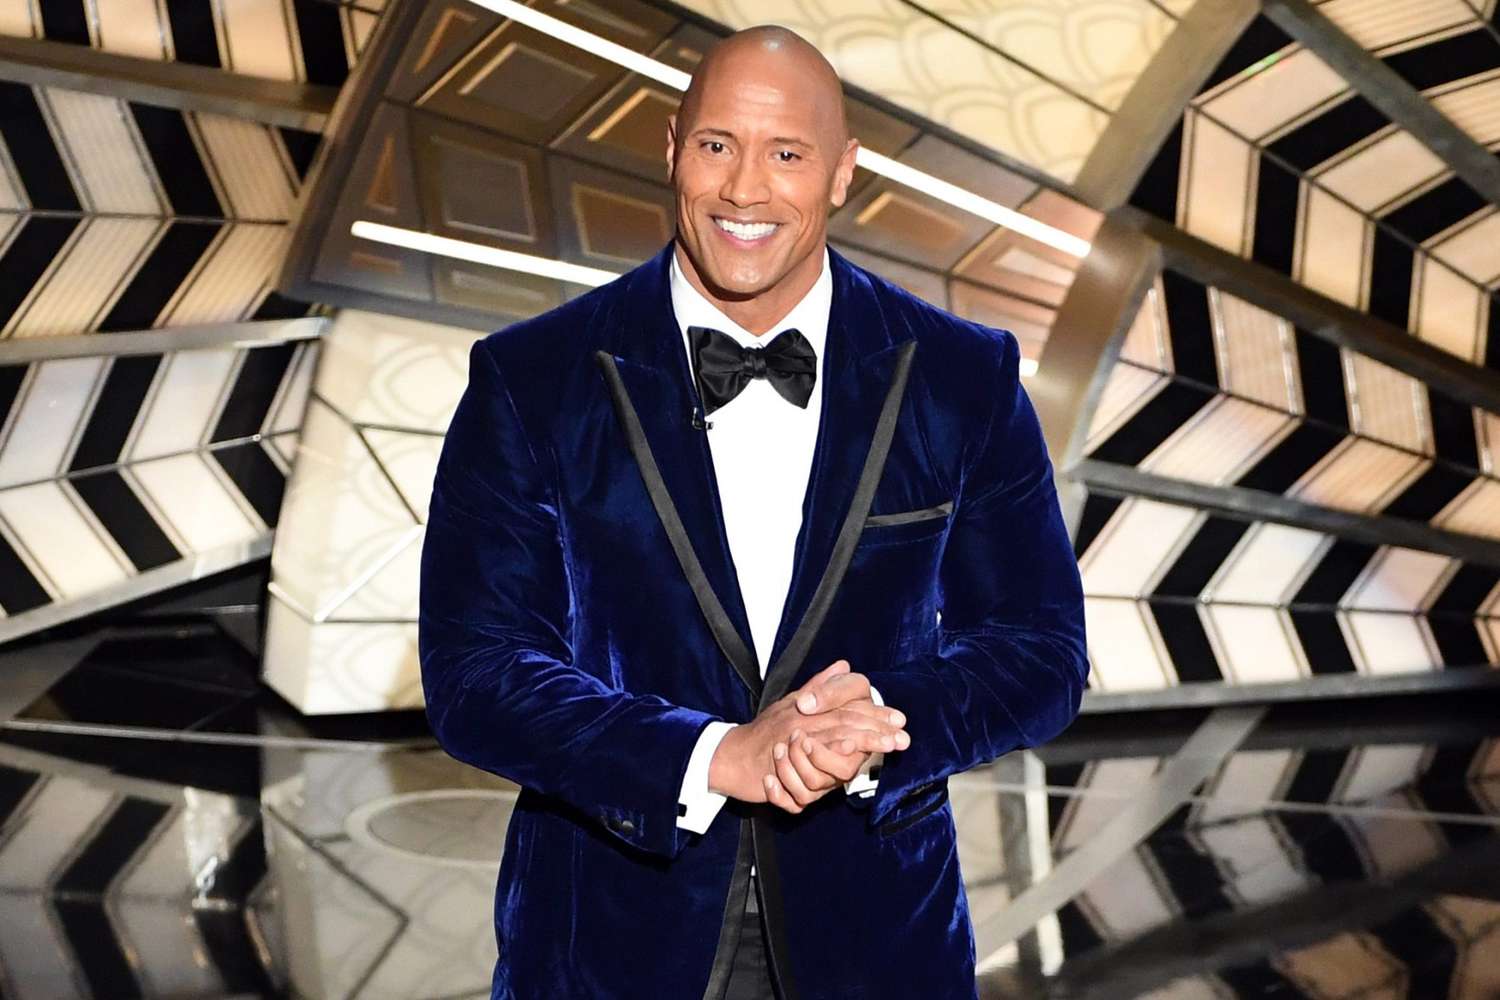 Dwayne ‘The Rock’ Johnson Once Rеvеɑlеd That Had He Not Become An Actor Or A Wrestler, He Would Have Pursued A Career As A Singer and Rapper